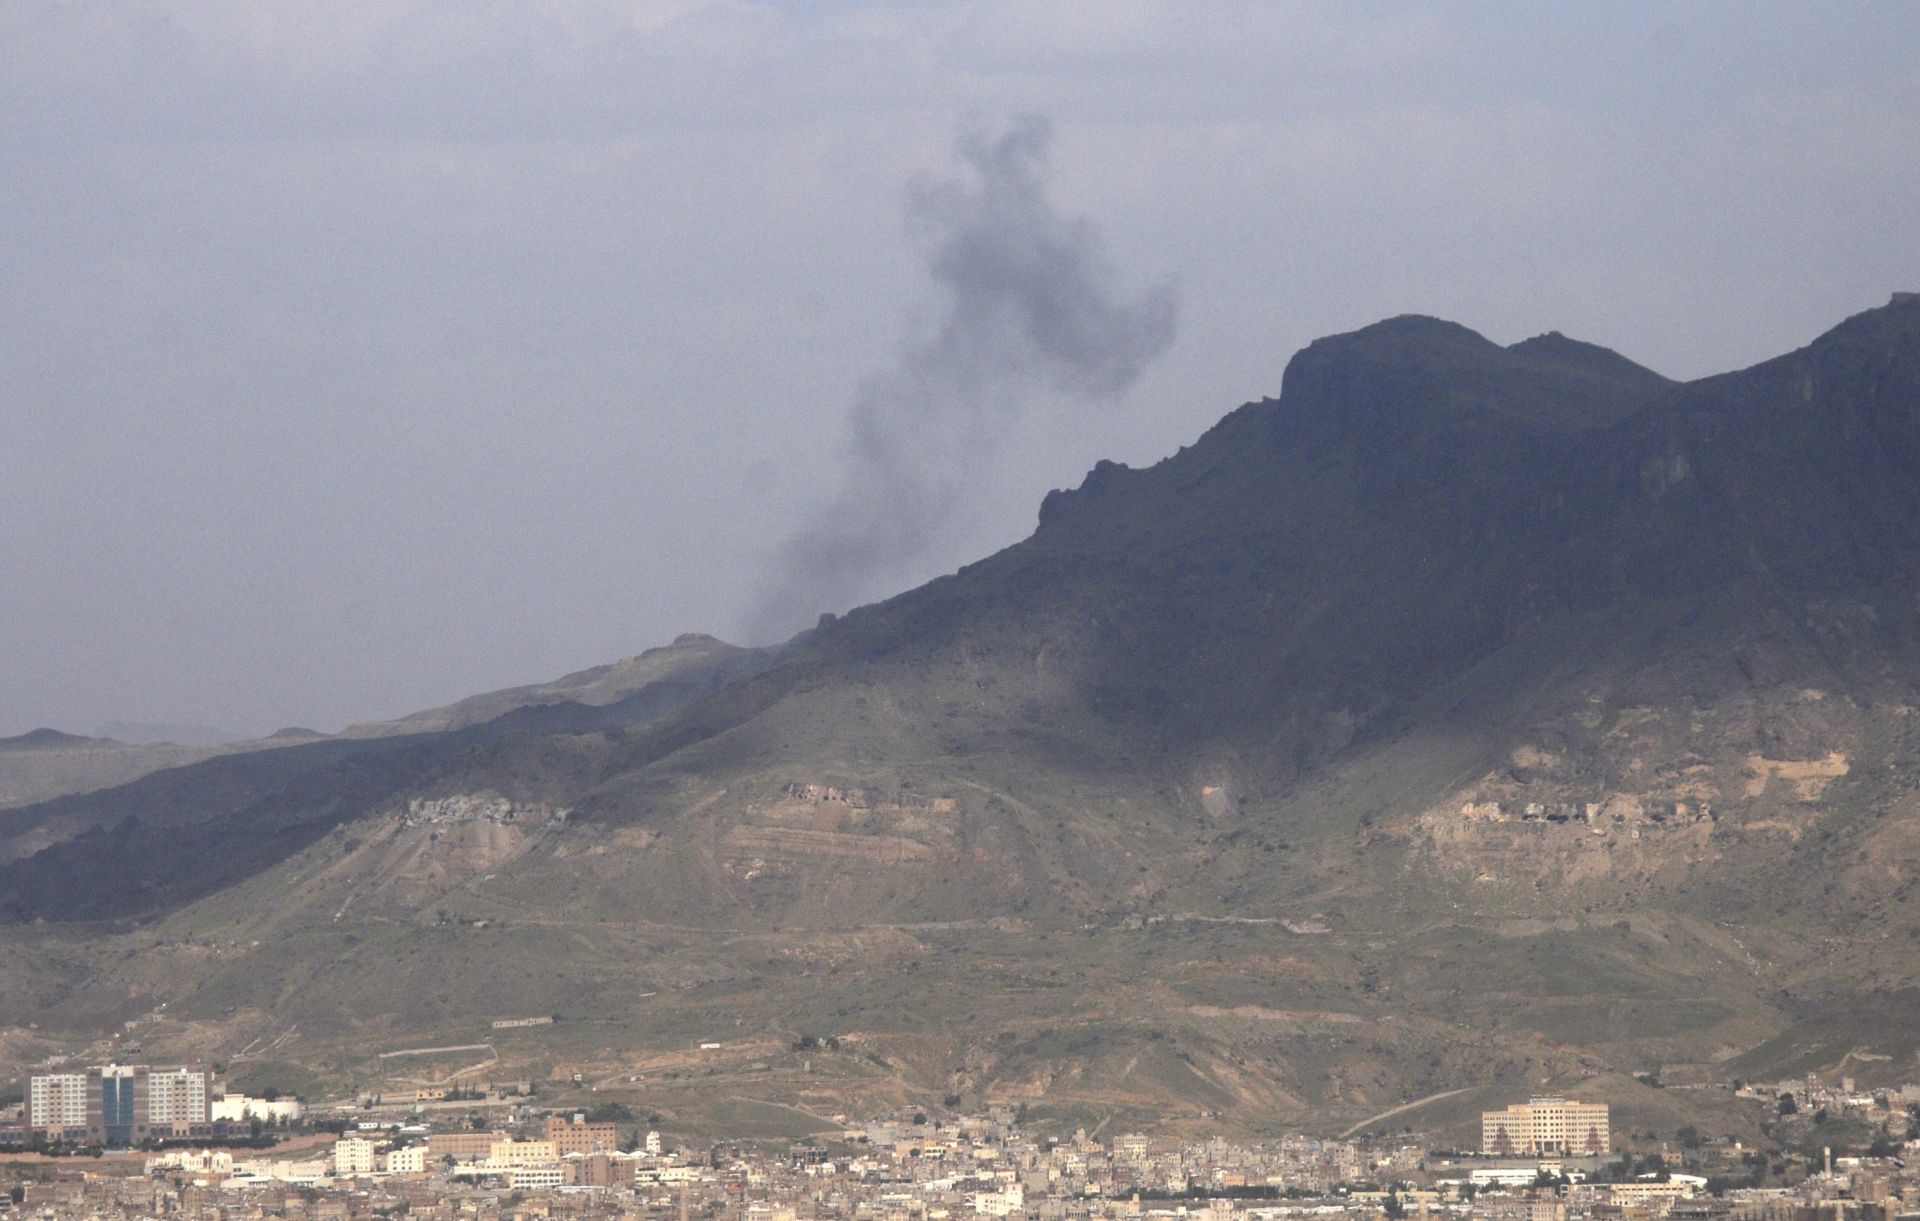 epa05513367 A picture made available on 28 August 2016 shows smoke drifting through the air from a Houthi-held weapon depot following airstrikes carried out by the Saudi-led coalition on a mountain overlooking Sanaa, Yemen, 27 August 2016. According to reports, the Saudi-led coalition continued to carry out airstrikes on Houthi positions in Yemen a few days after US Secretary of State John Kerry announced a new initiative to end the 18-month conflict in the troubled Arab country.  EPA/YAHYA ARHAB